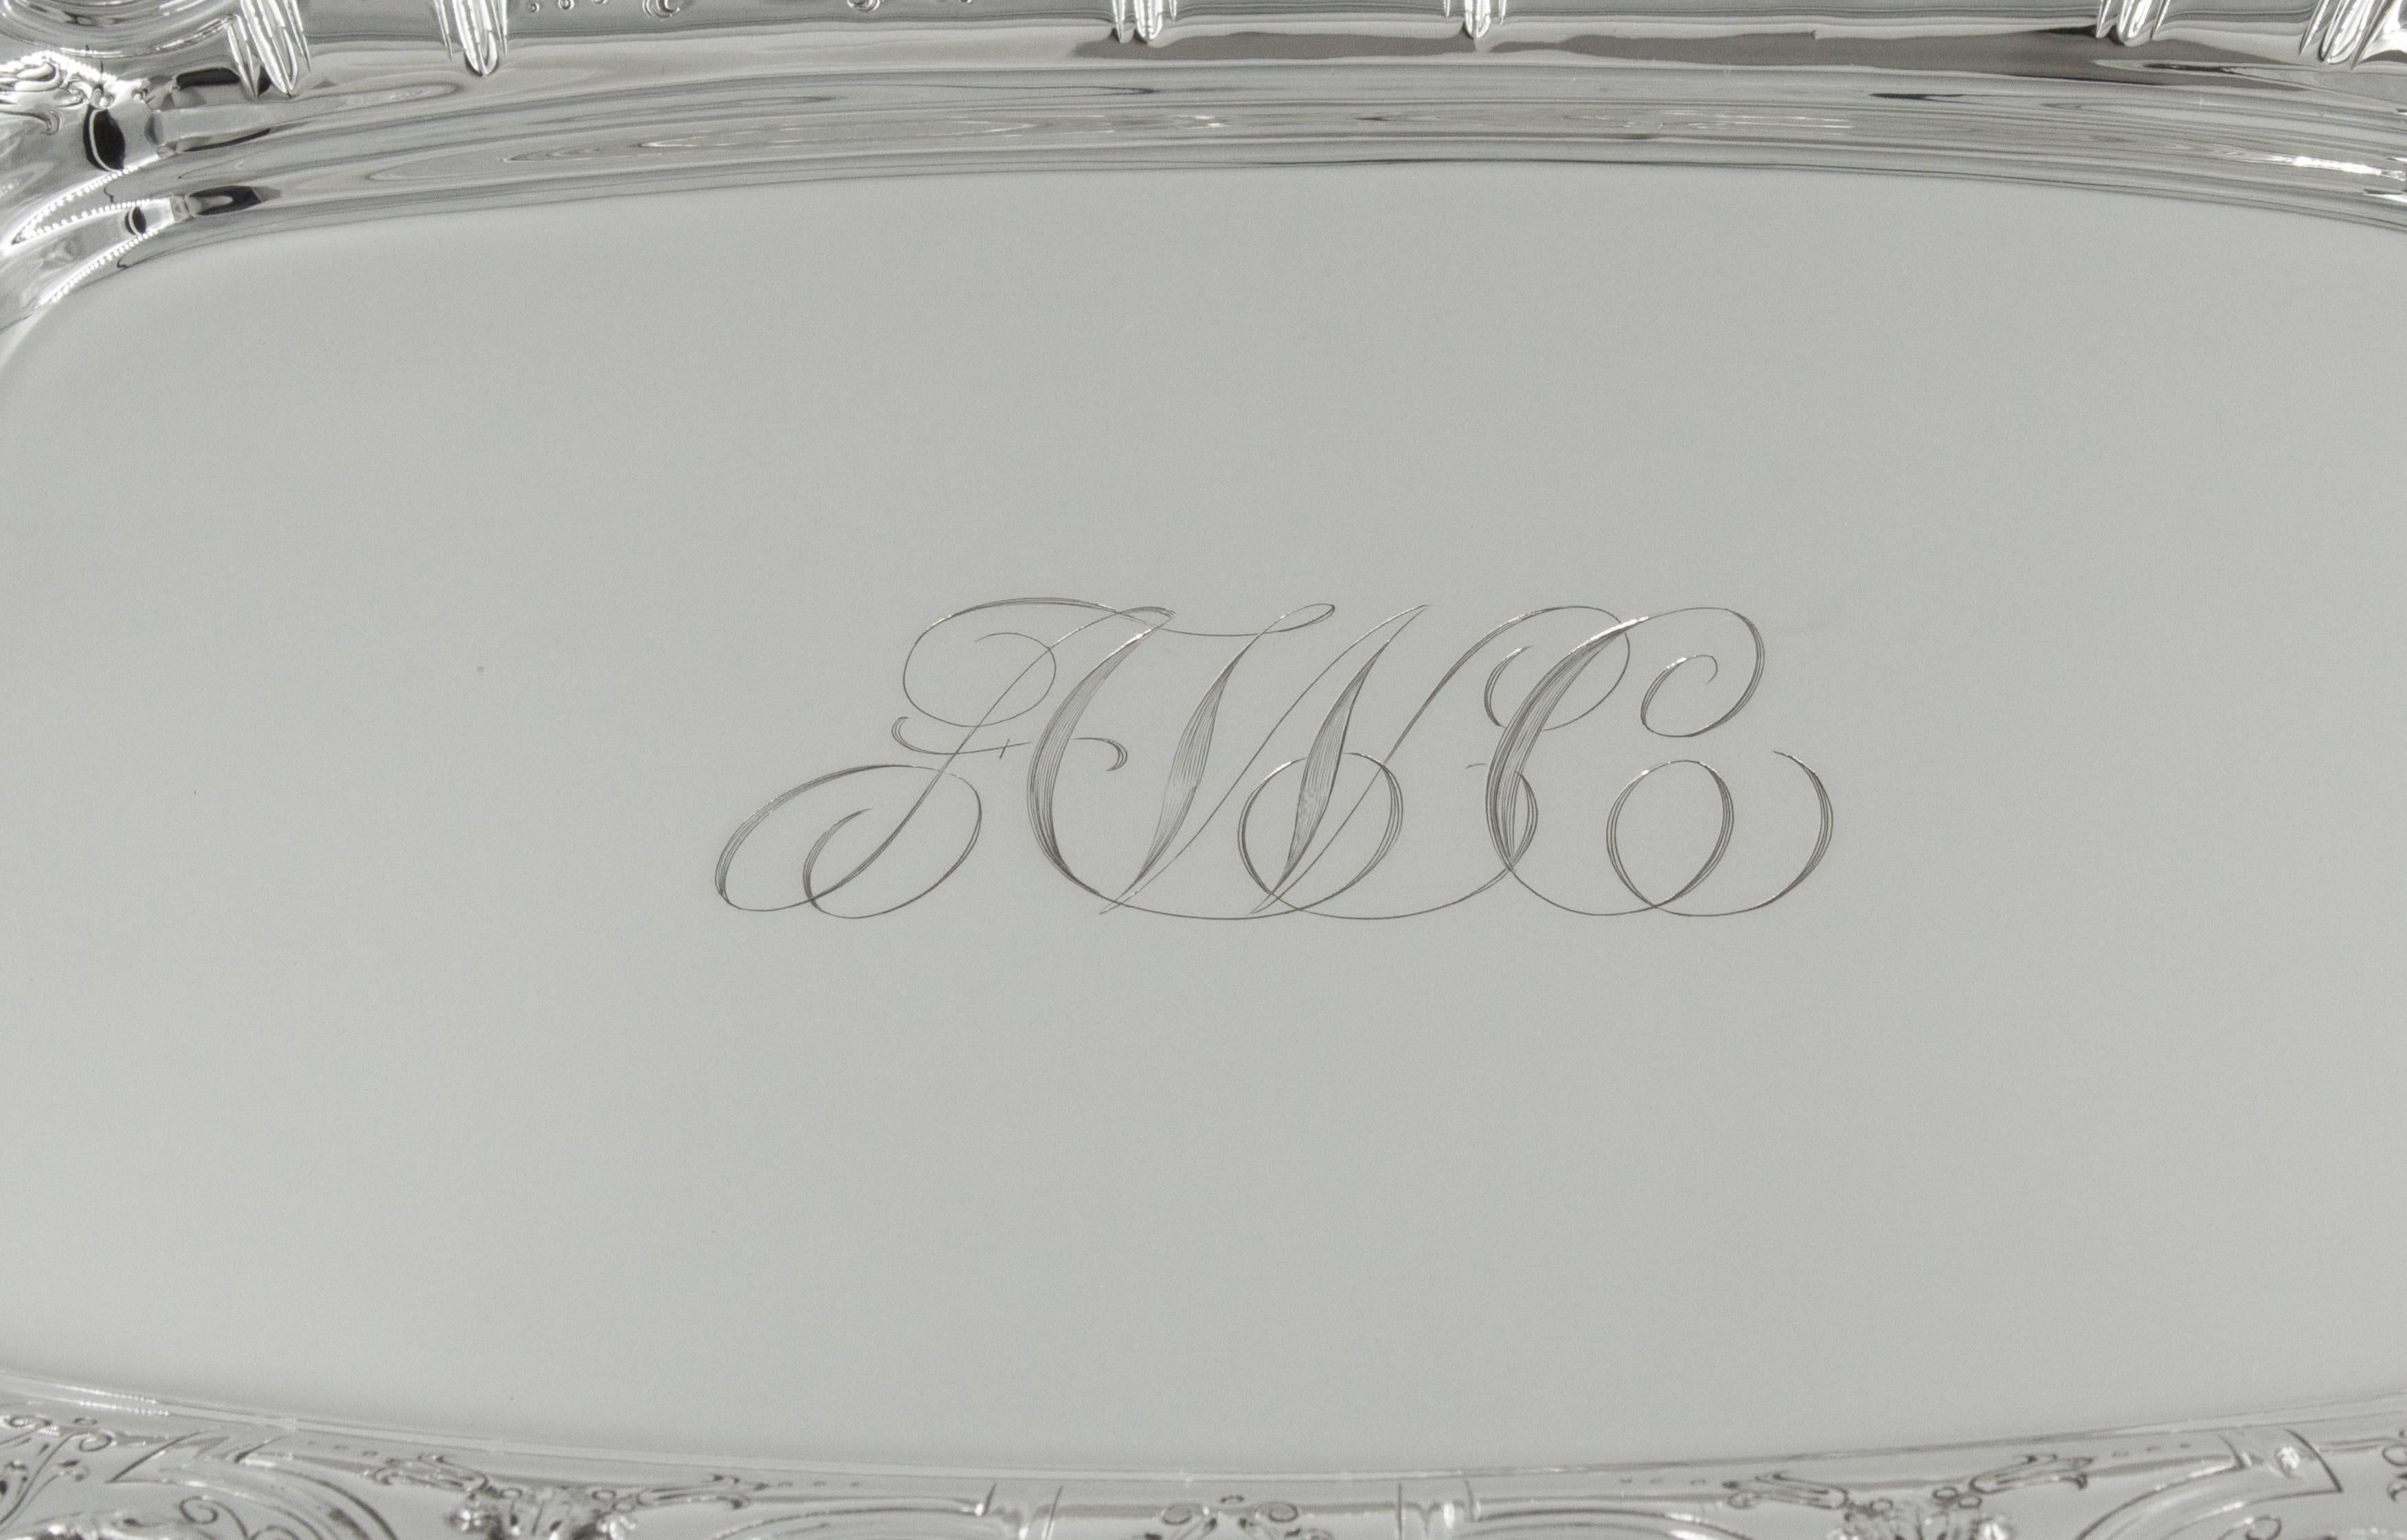 This piece is a work of art; just look at that majestic border! Pierced work with medallions comes together in harmony to make this dish simply breath-taking. We also love the shape, unlike the usual round this is oblong and has a scalloped rim.